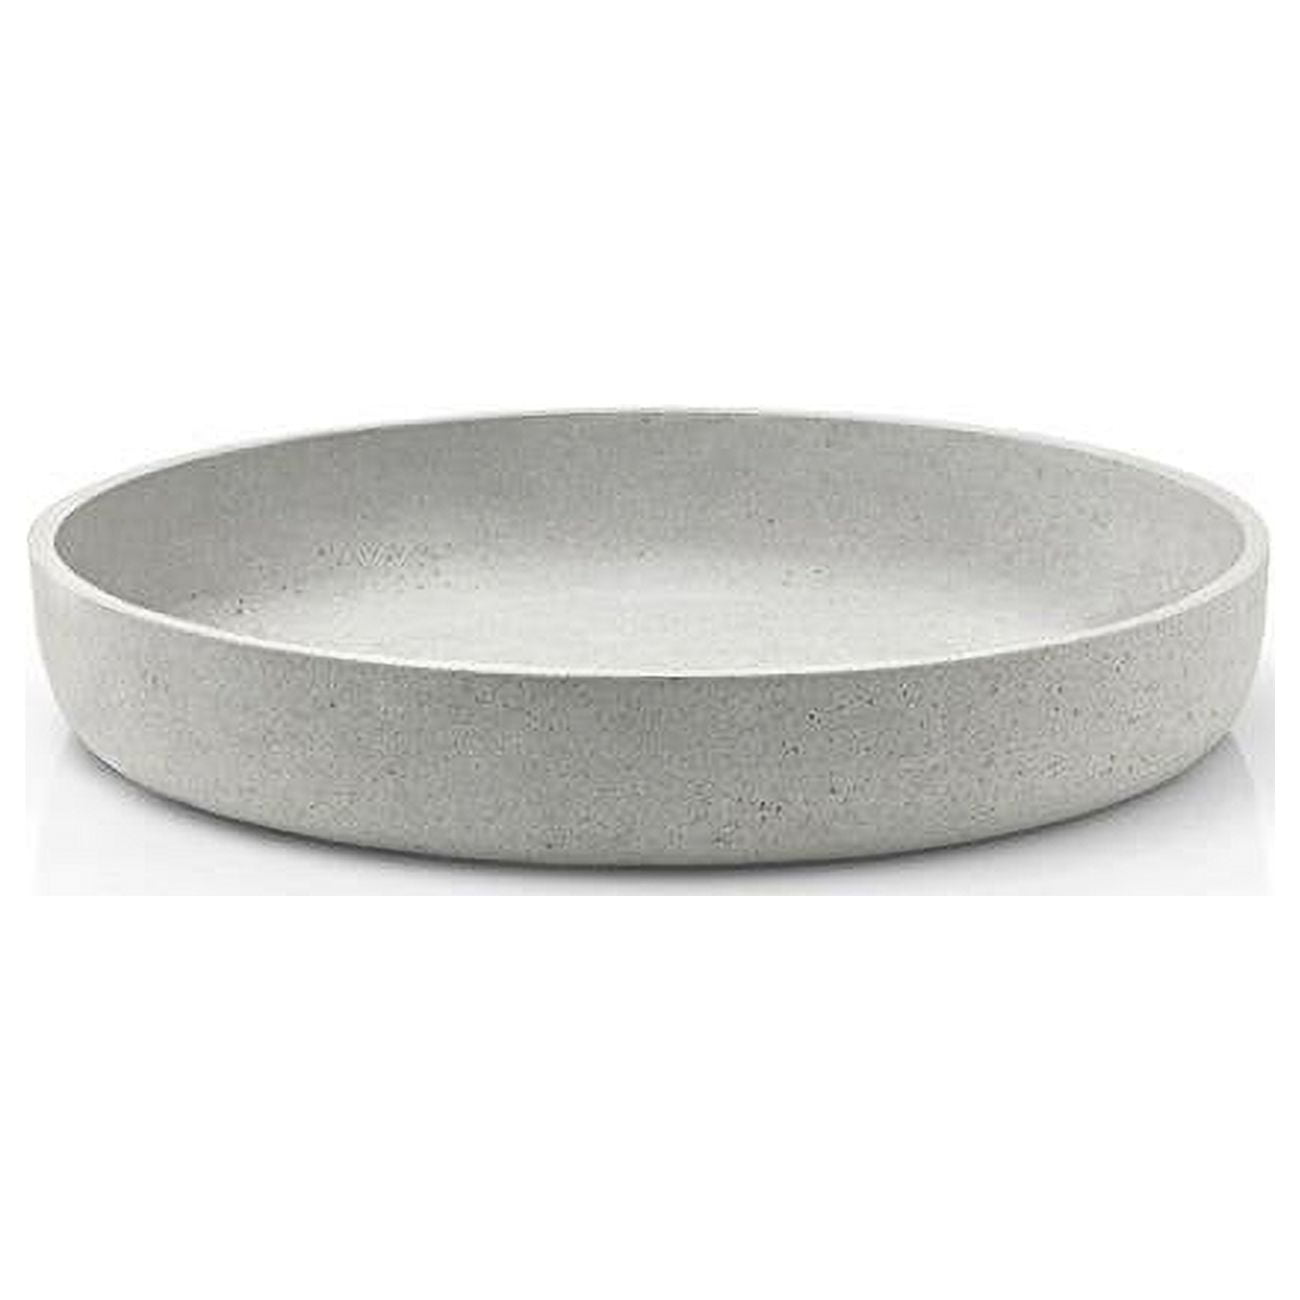 Picture of Blomus 65445 Decoration Bowl Tray - Small